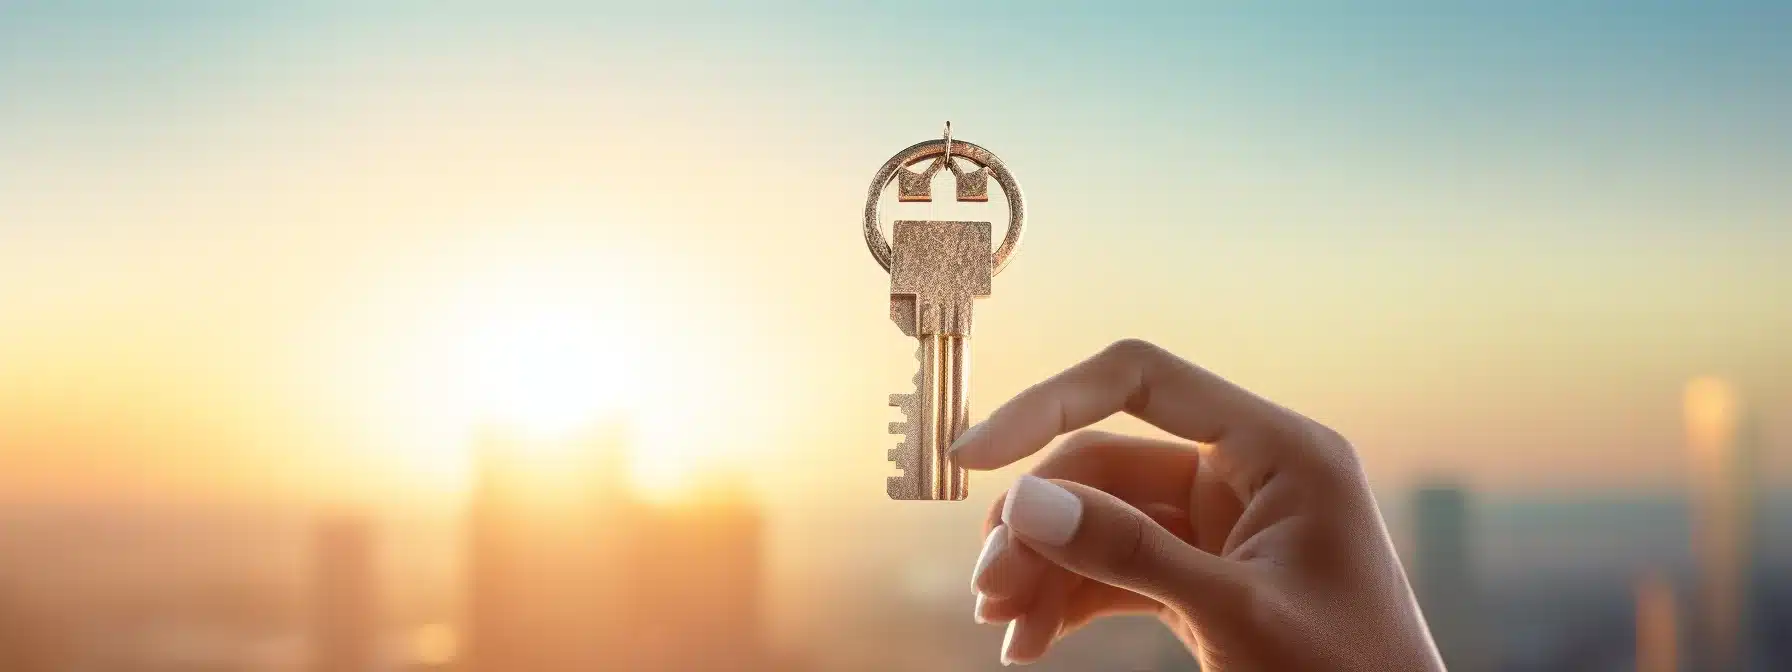 A Person Holding A Key With A Successful Brand Strategy Depicted In The Background.